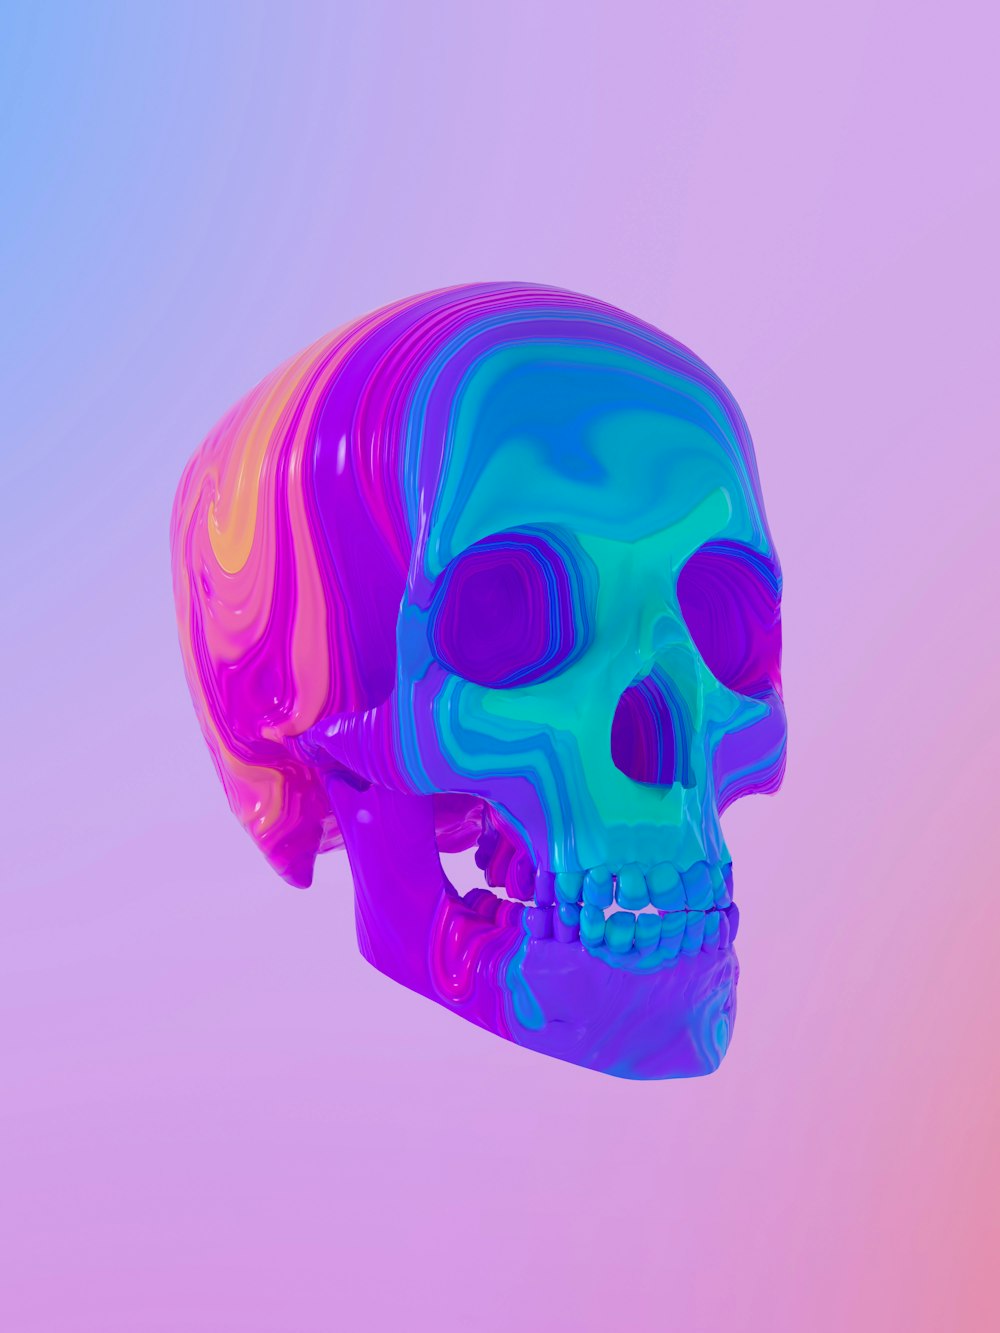 a multicolored skull is shown against a pink and blue background